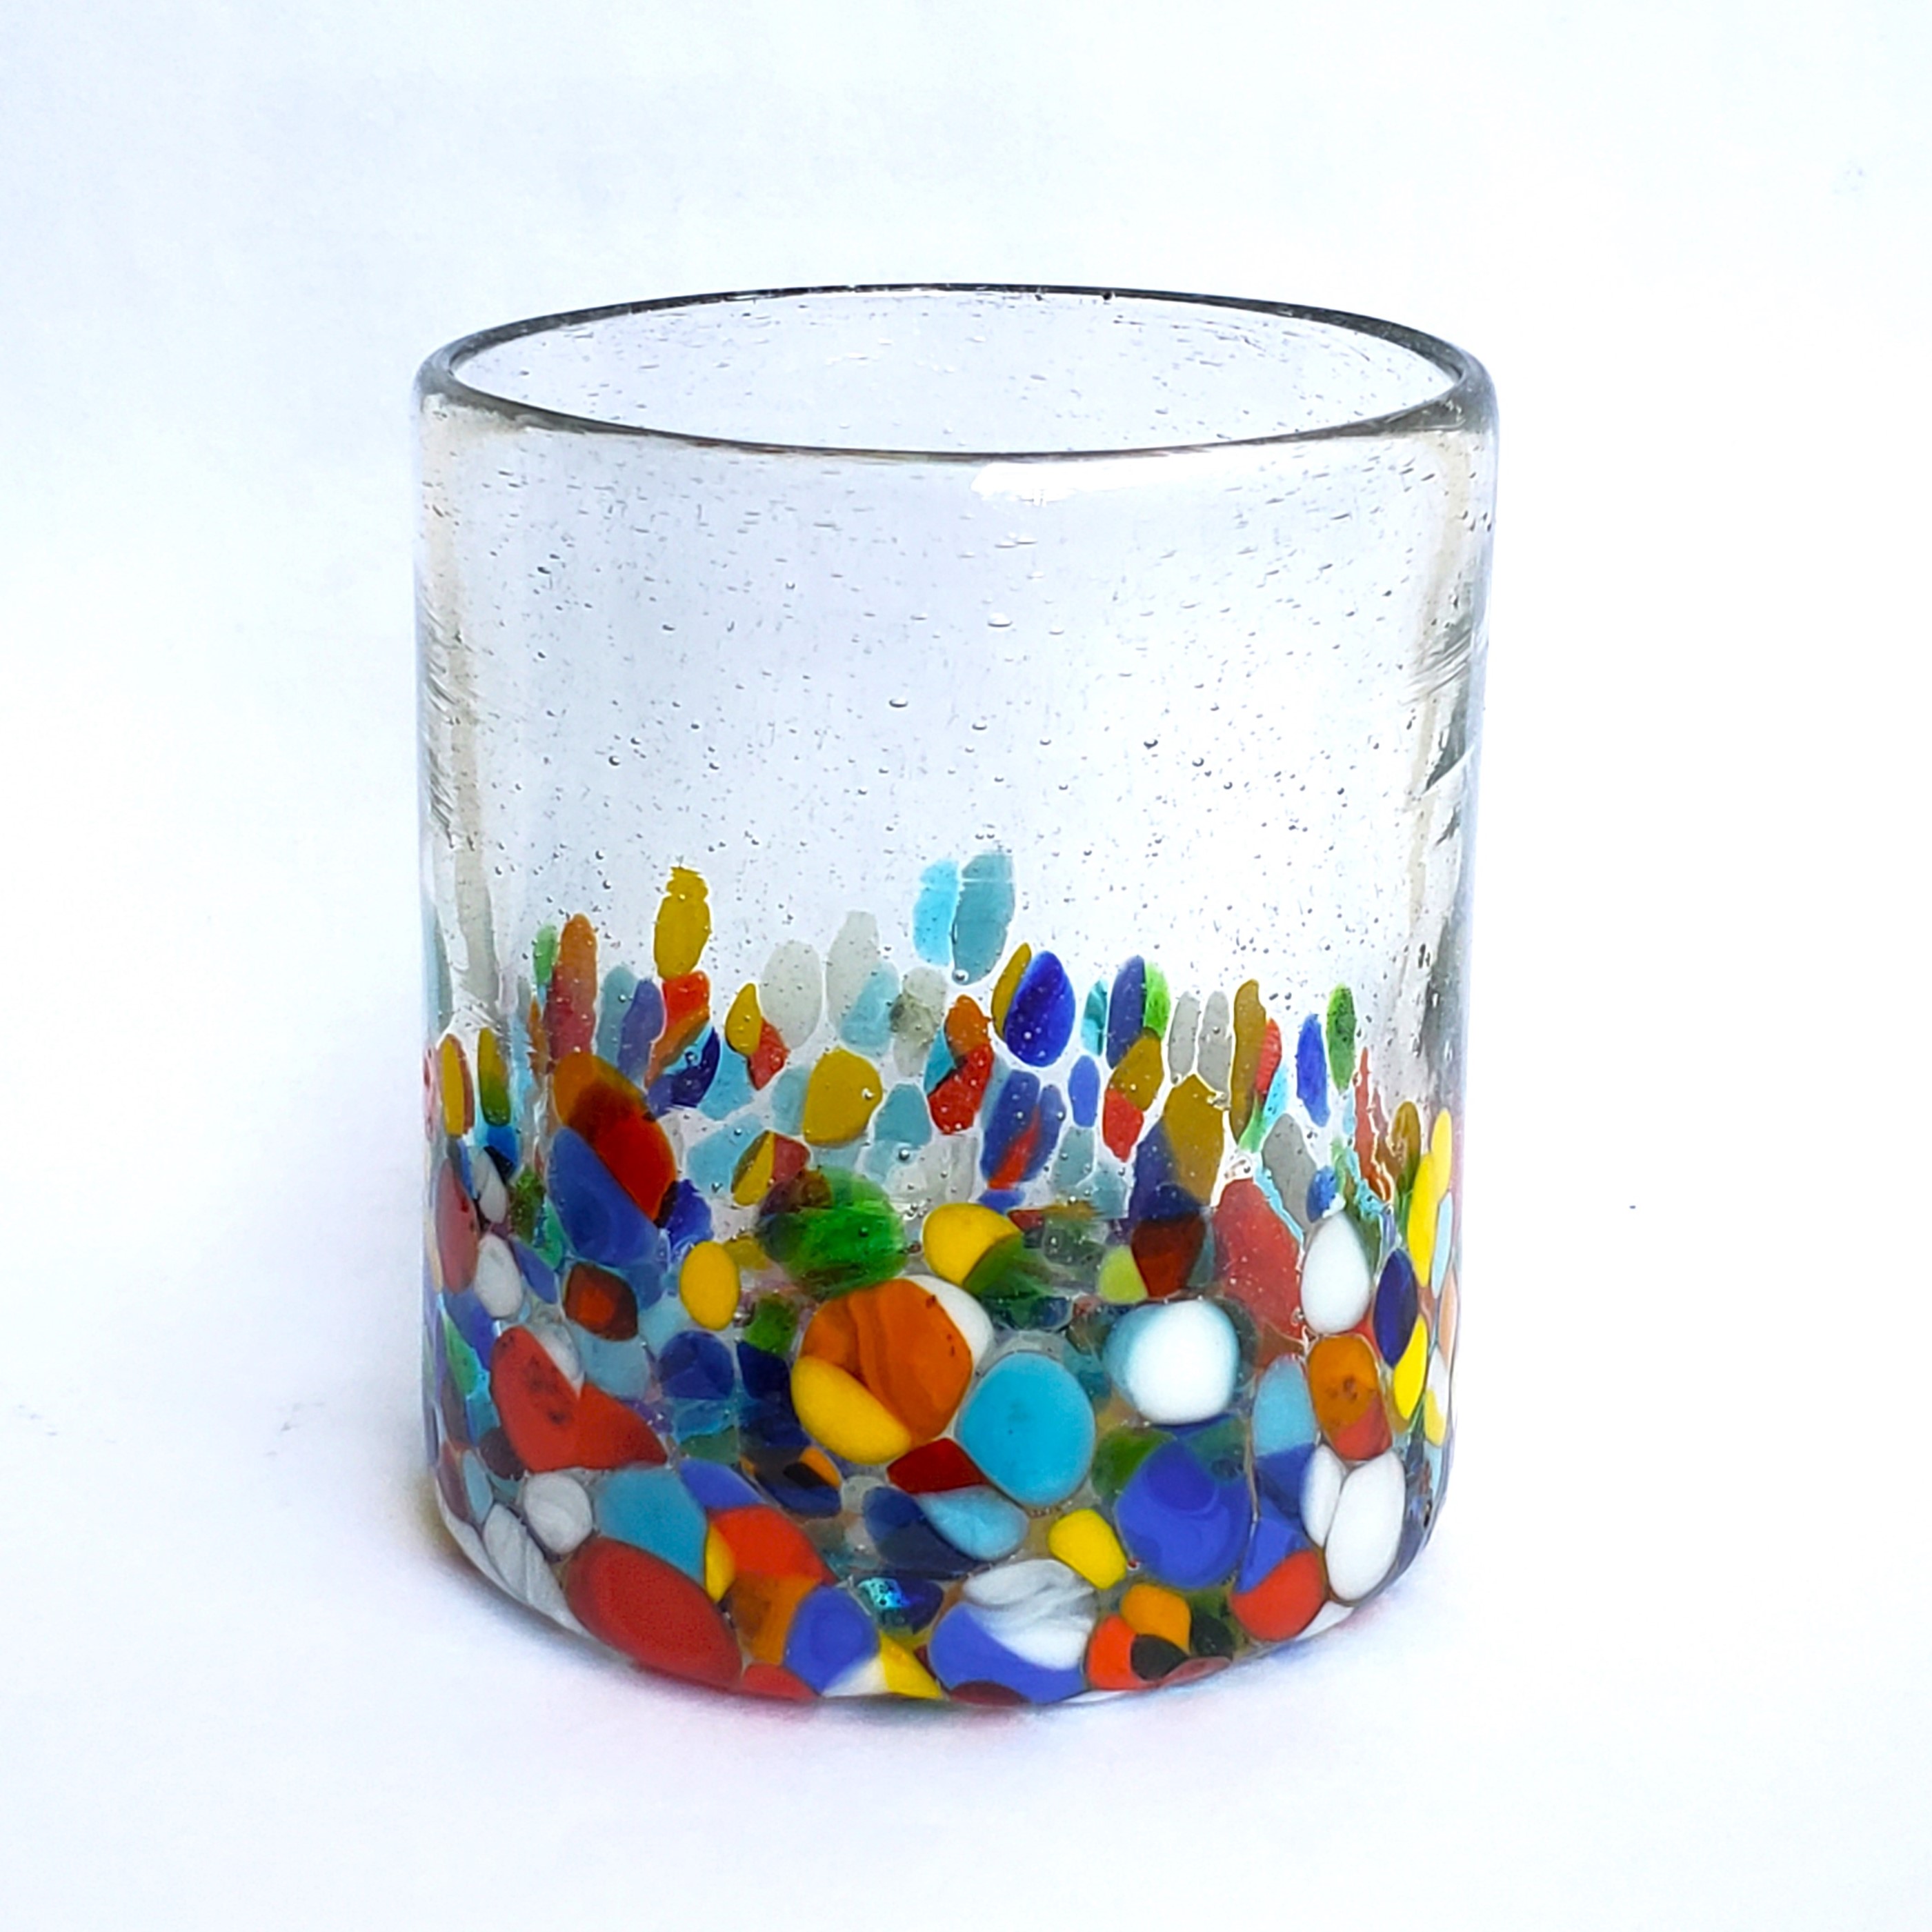 Wholesale Mexican Glasses / Clear & Confetti 9 oz Short Tumblers  / Our Clear & Confetti Glassware combines  the best of two worlds: clear, thick, sturdy handcrafted glass on top, meets the colorful, festive, confetti bottom! These glasses will sure be a standout in any table setting or as a fabulous gift for your loved ones. Crafted one by one by skilled artisans in Tonala, Mexico, each glass is different from the next making them unique works of art. You'll be amazed at how they make having a simple glass of water a happier experience. Made from eco-friendly recycled glass.